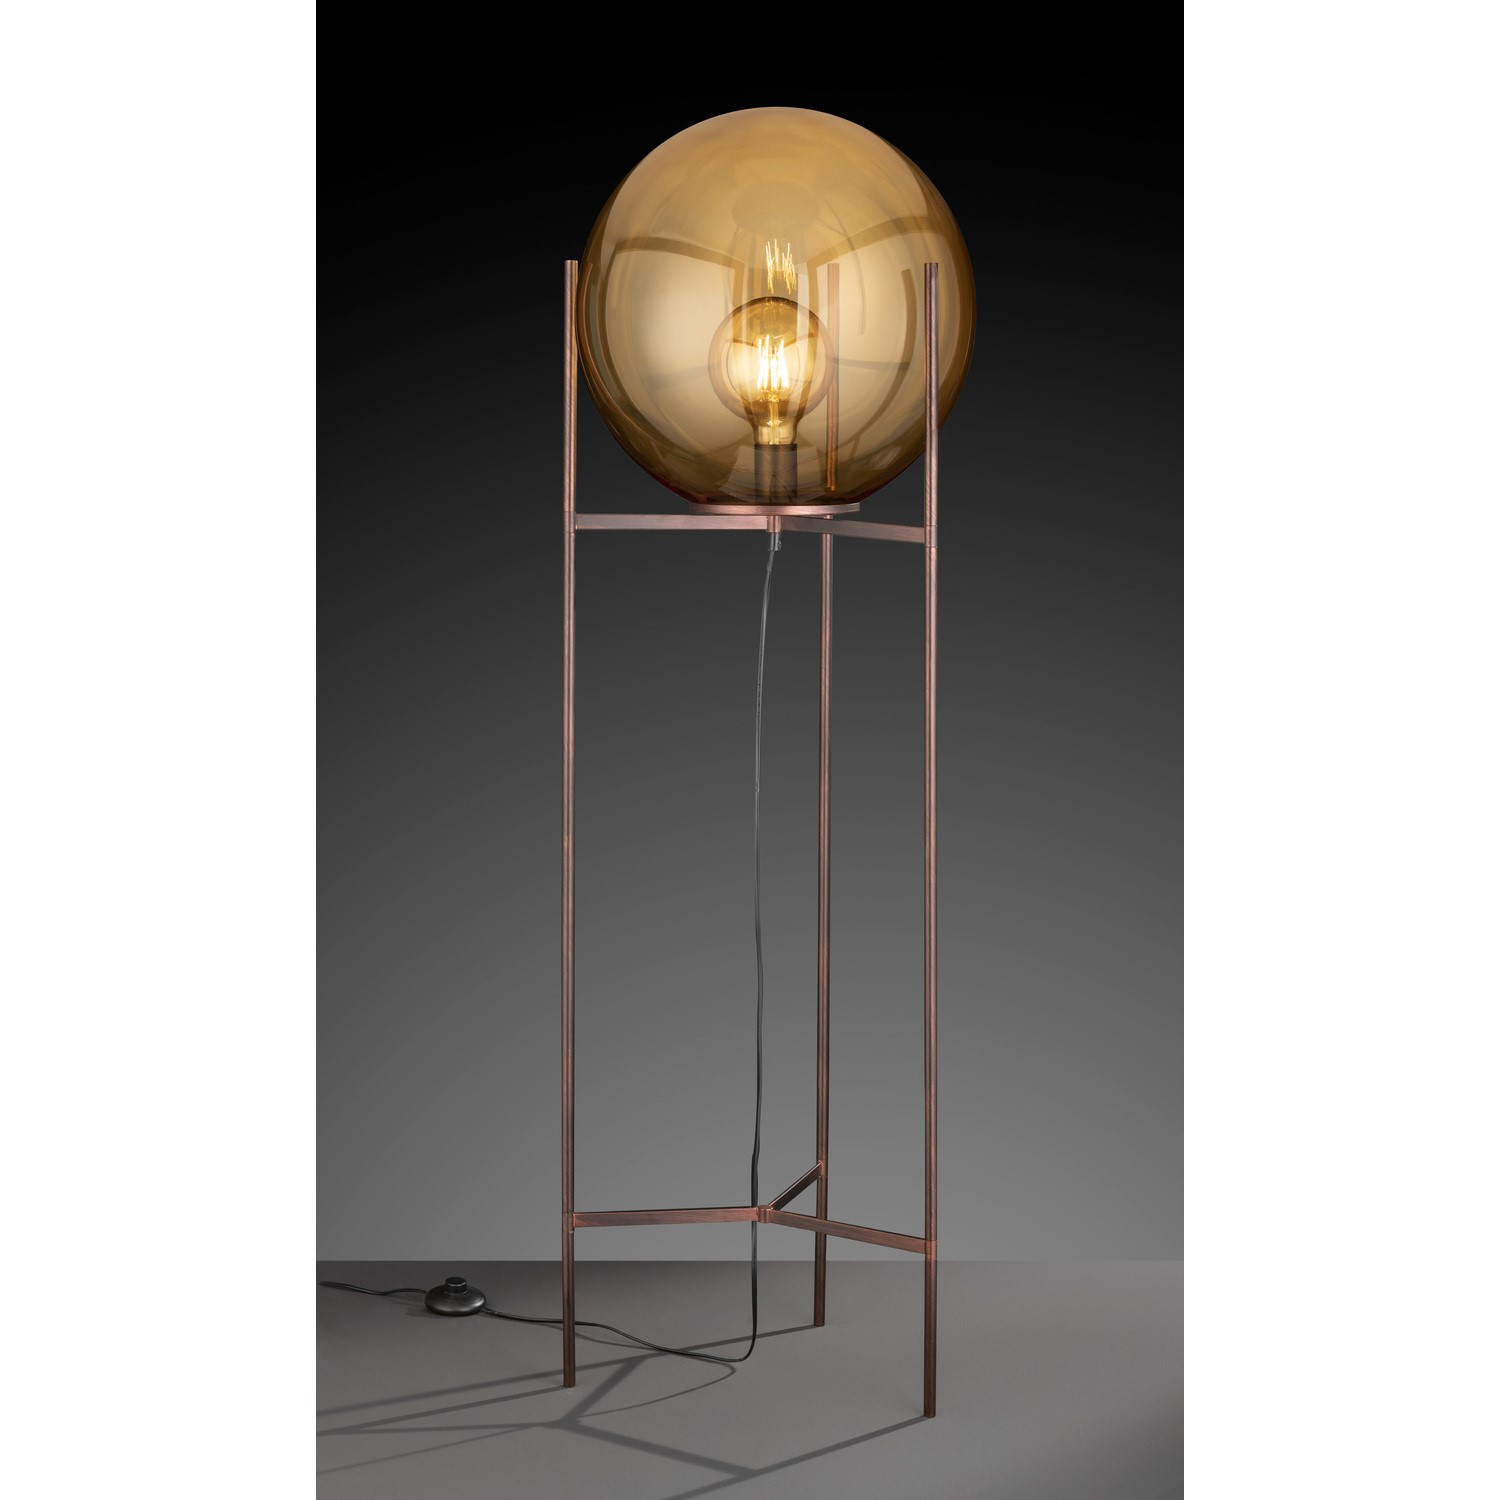 Floor Lamp in Antique Brown with Glass Shade  Ronda